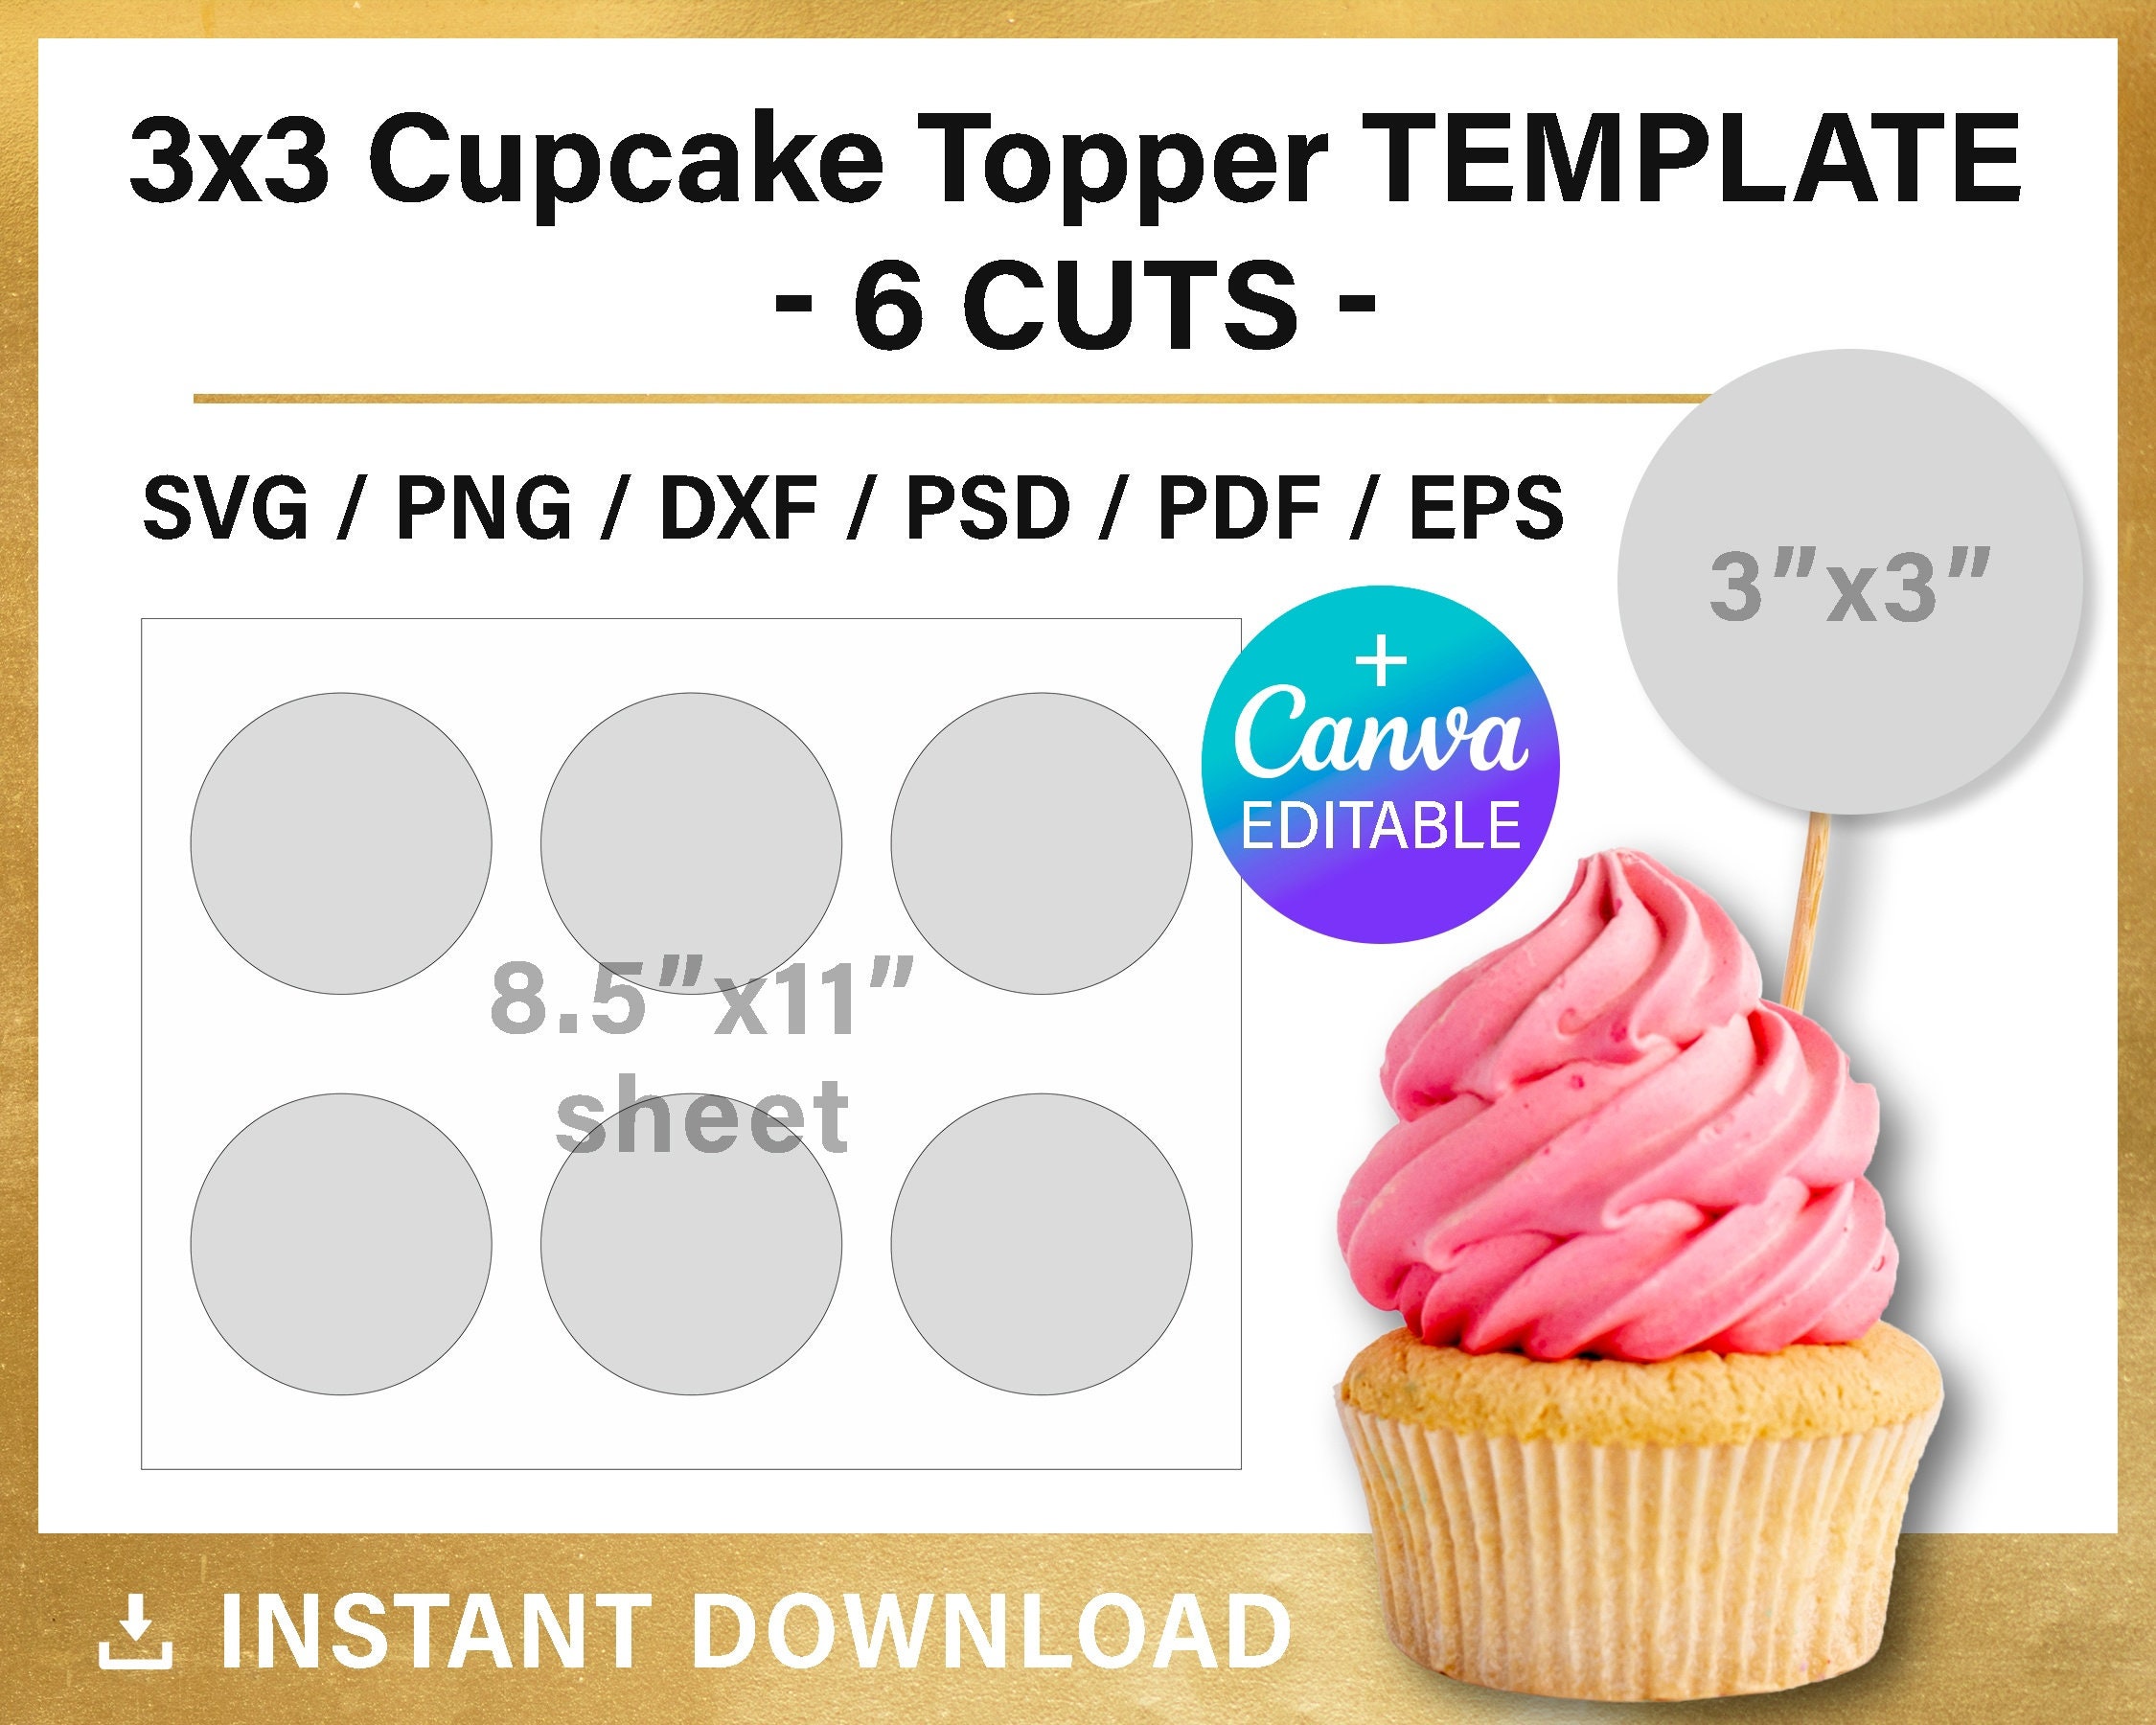 What Size Are Cupcake Toppers? - The Cupcake!